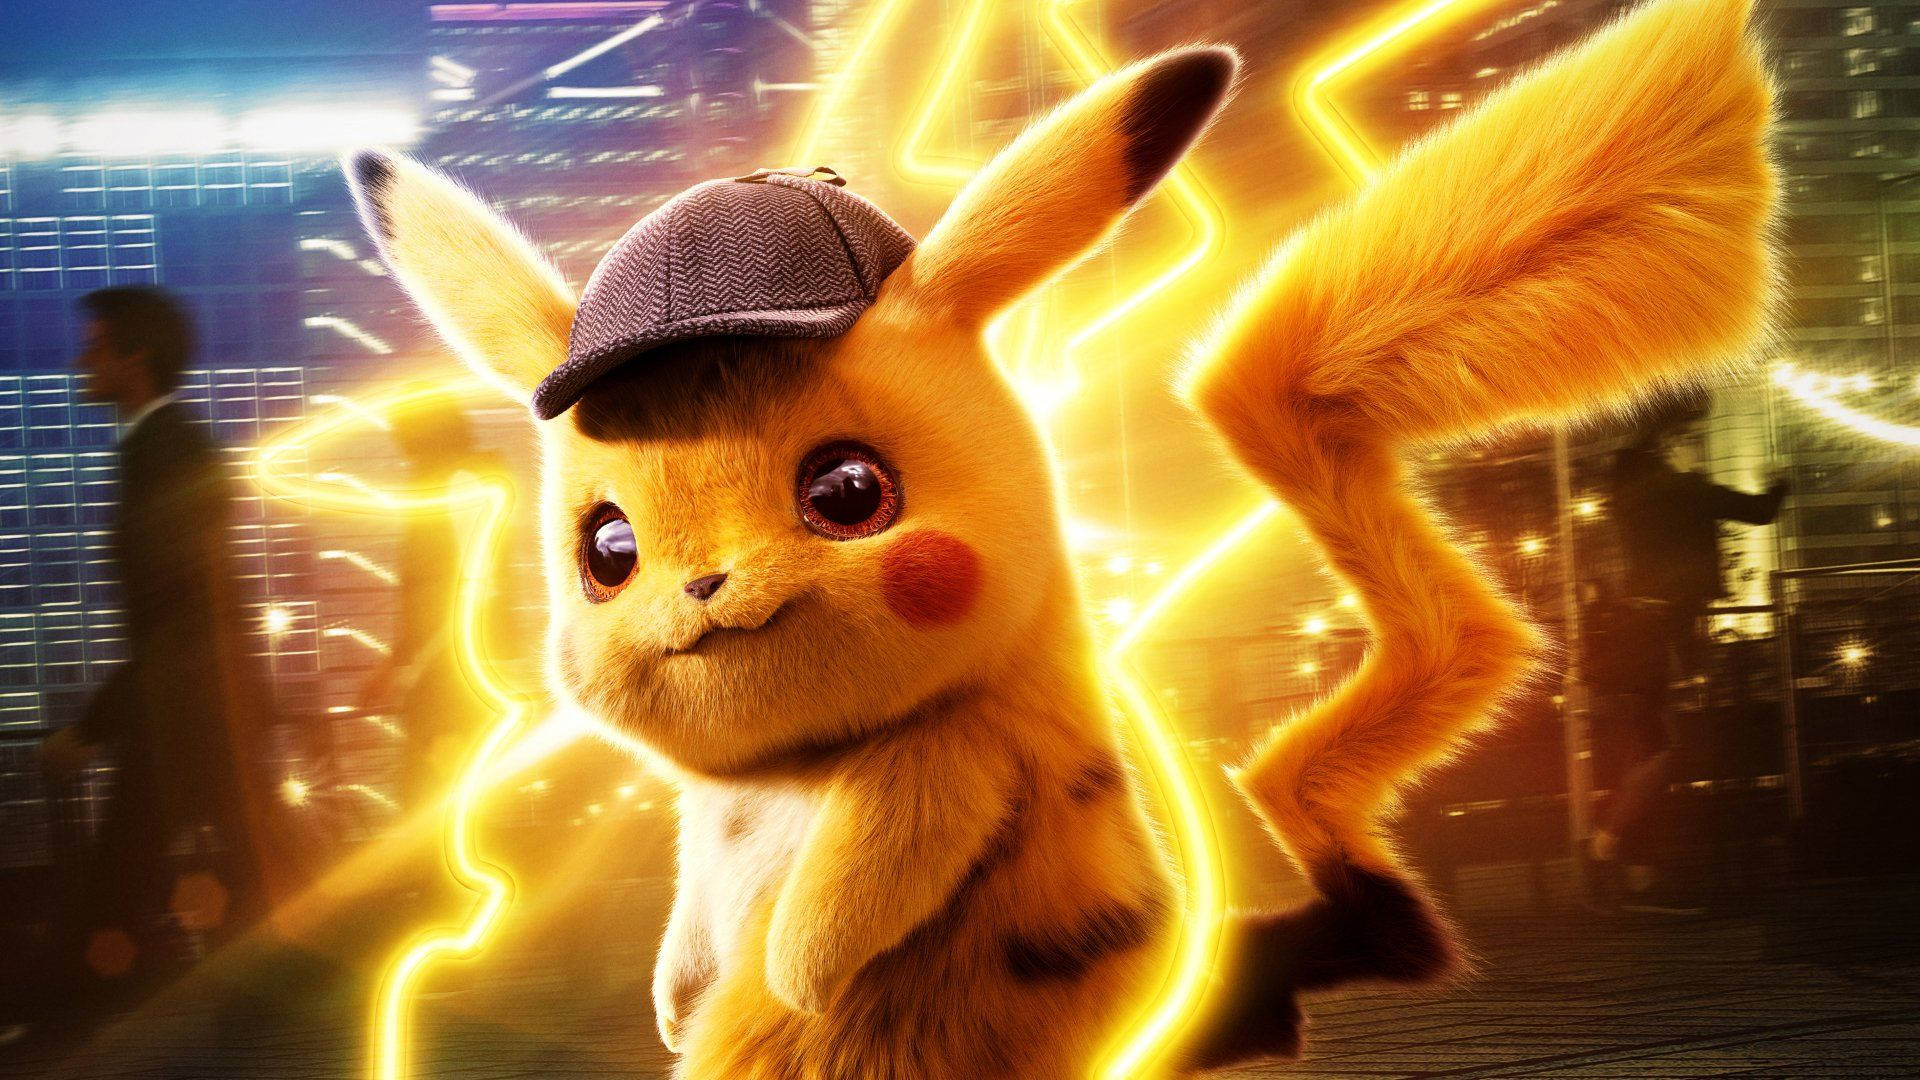 Pikachu 3d Sparkling With Electricity